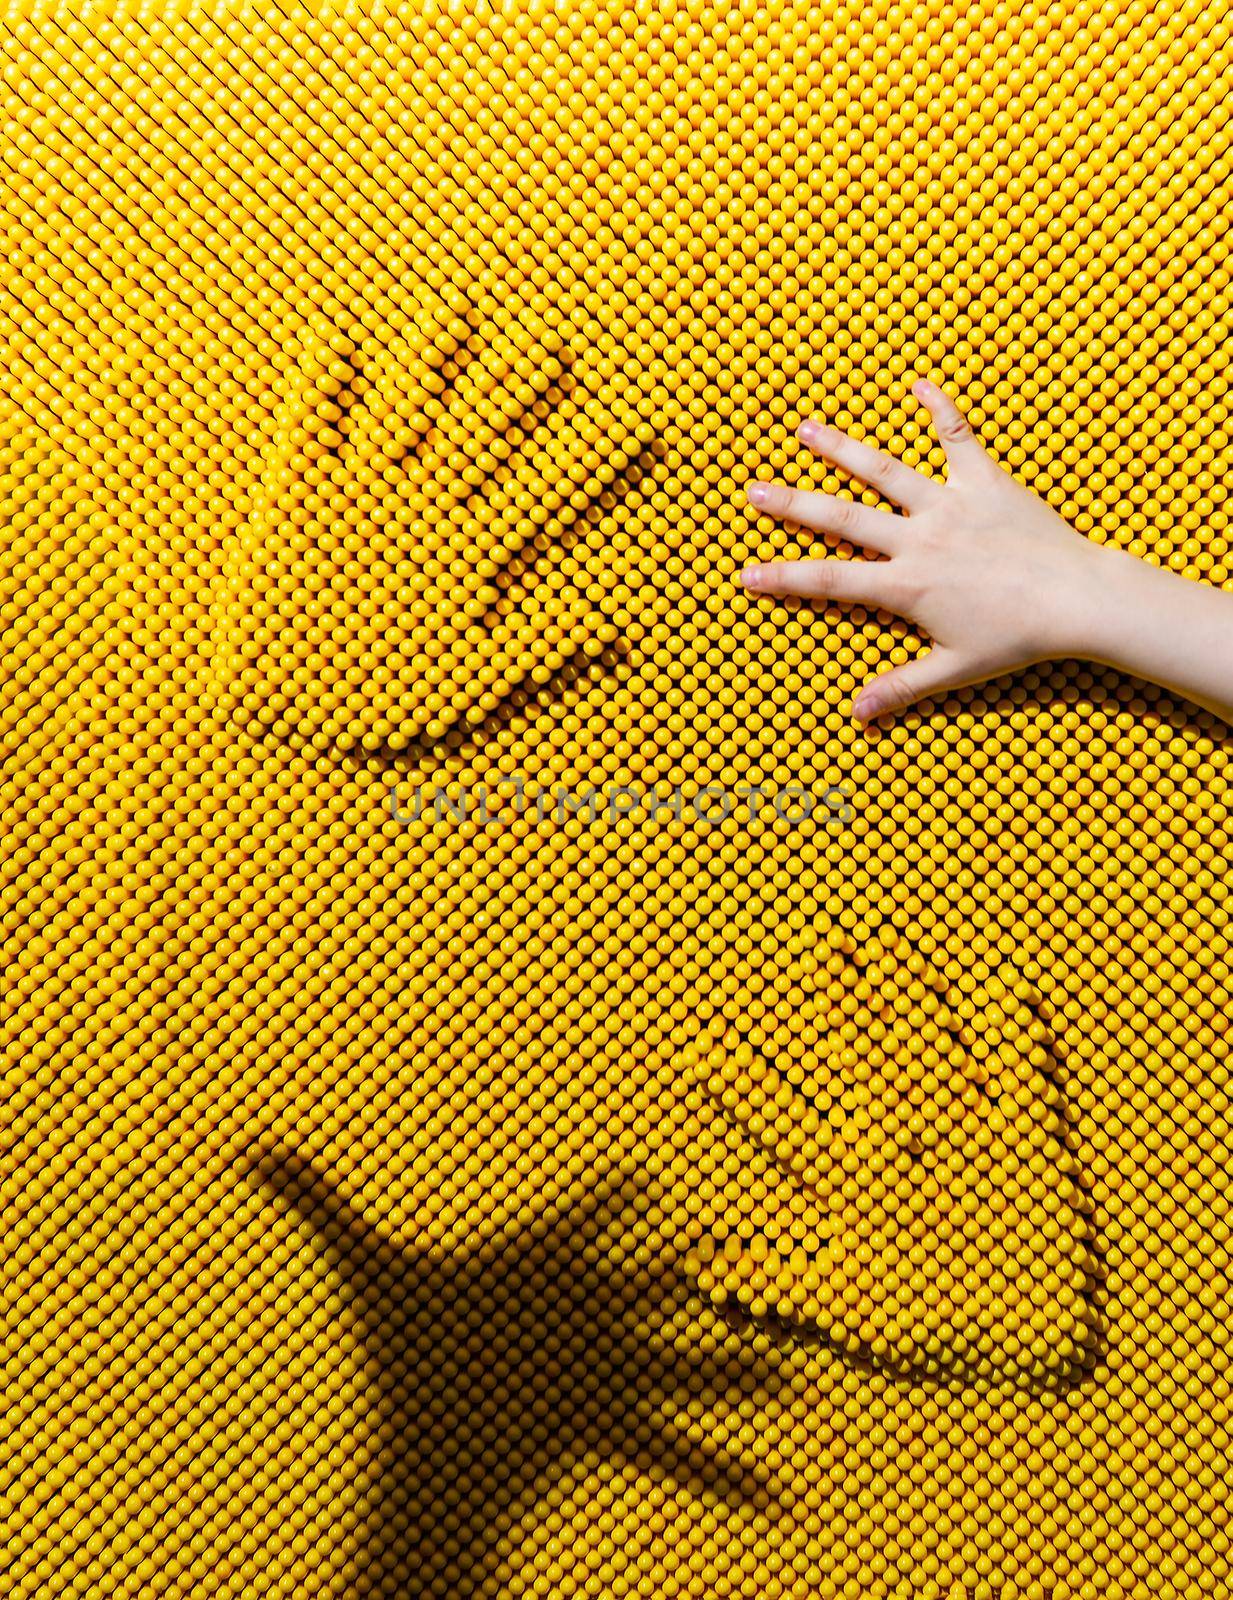 Two handprints on the yellow plastic pinscreen, children's hand and hand shadow. Child playing with contact screen. Pinart